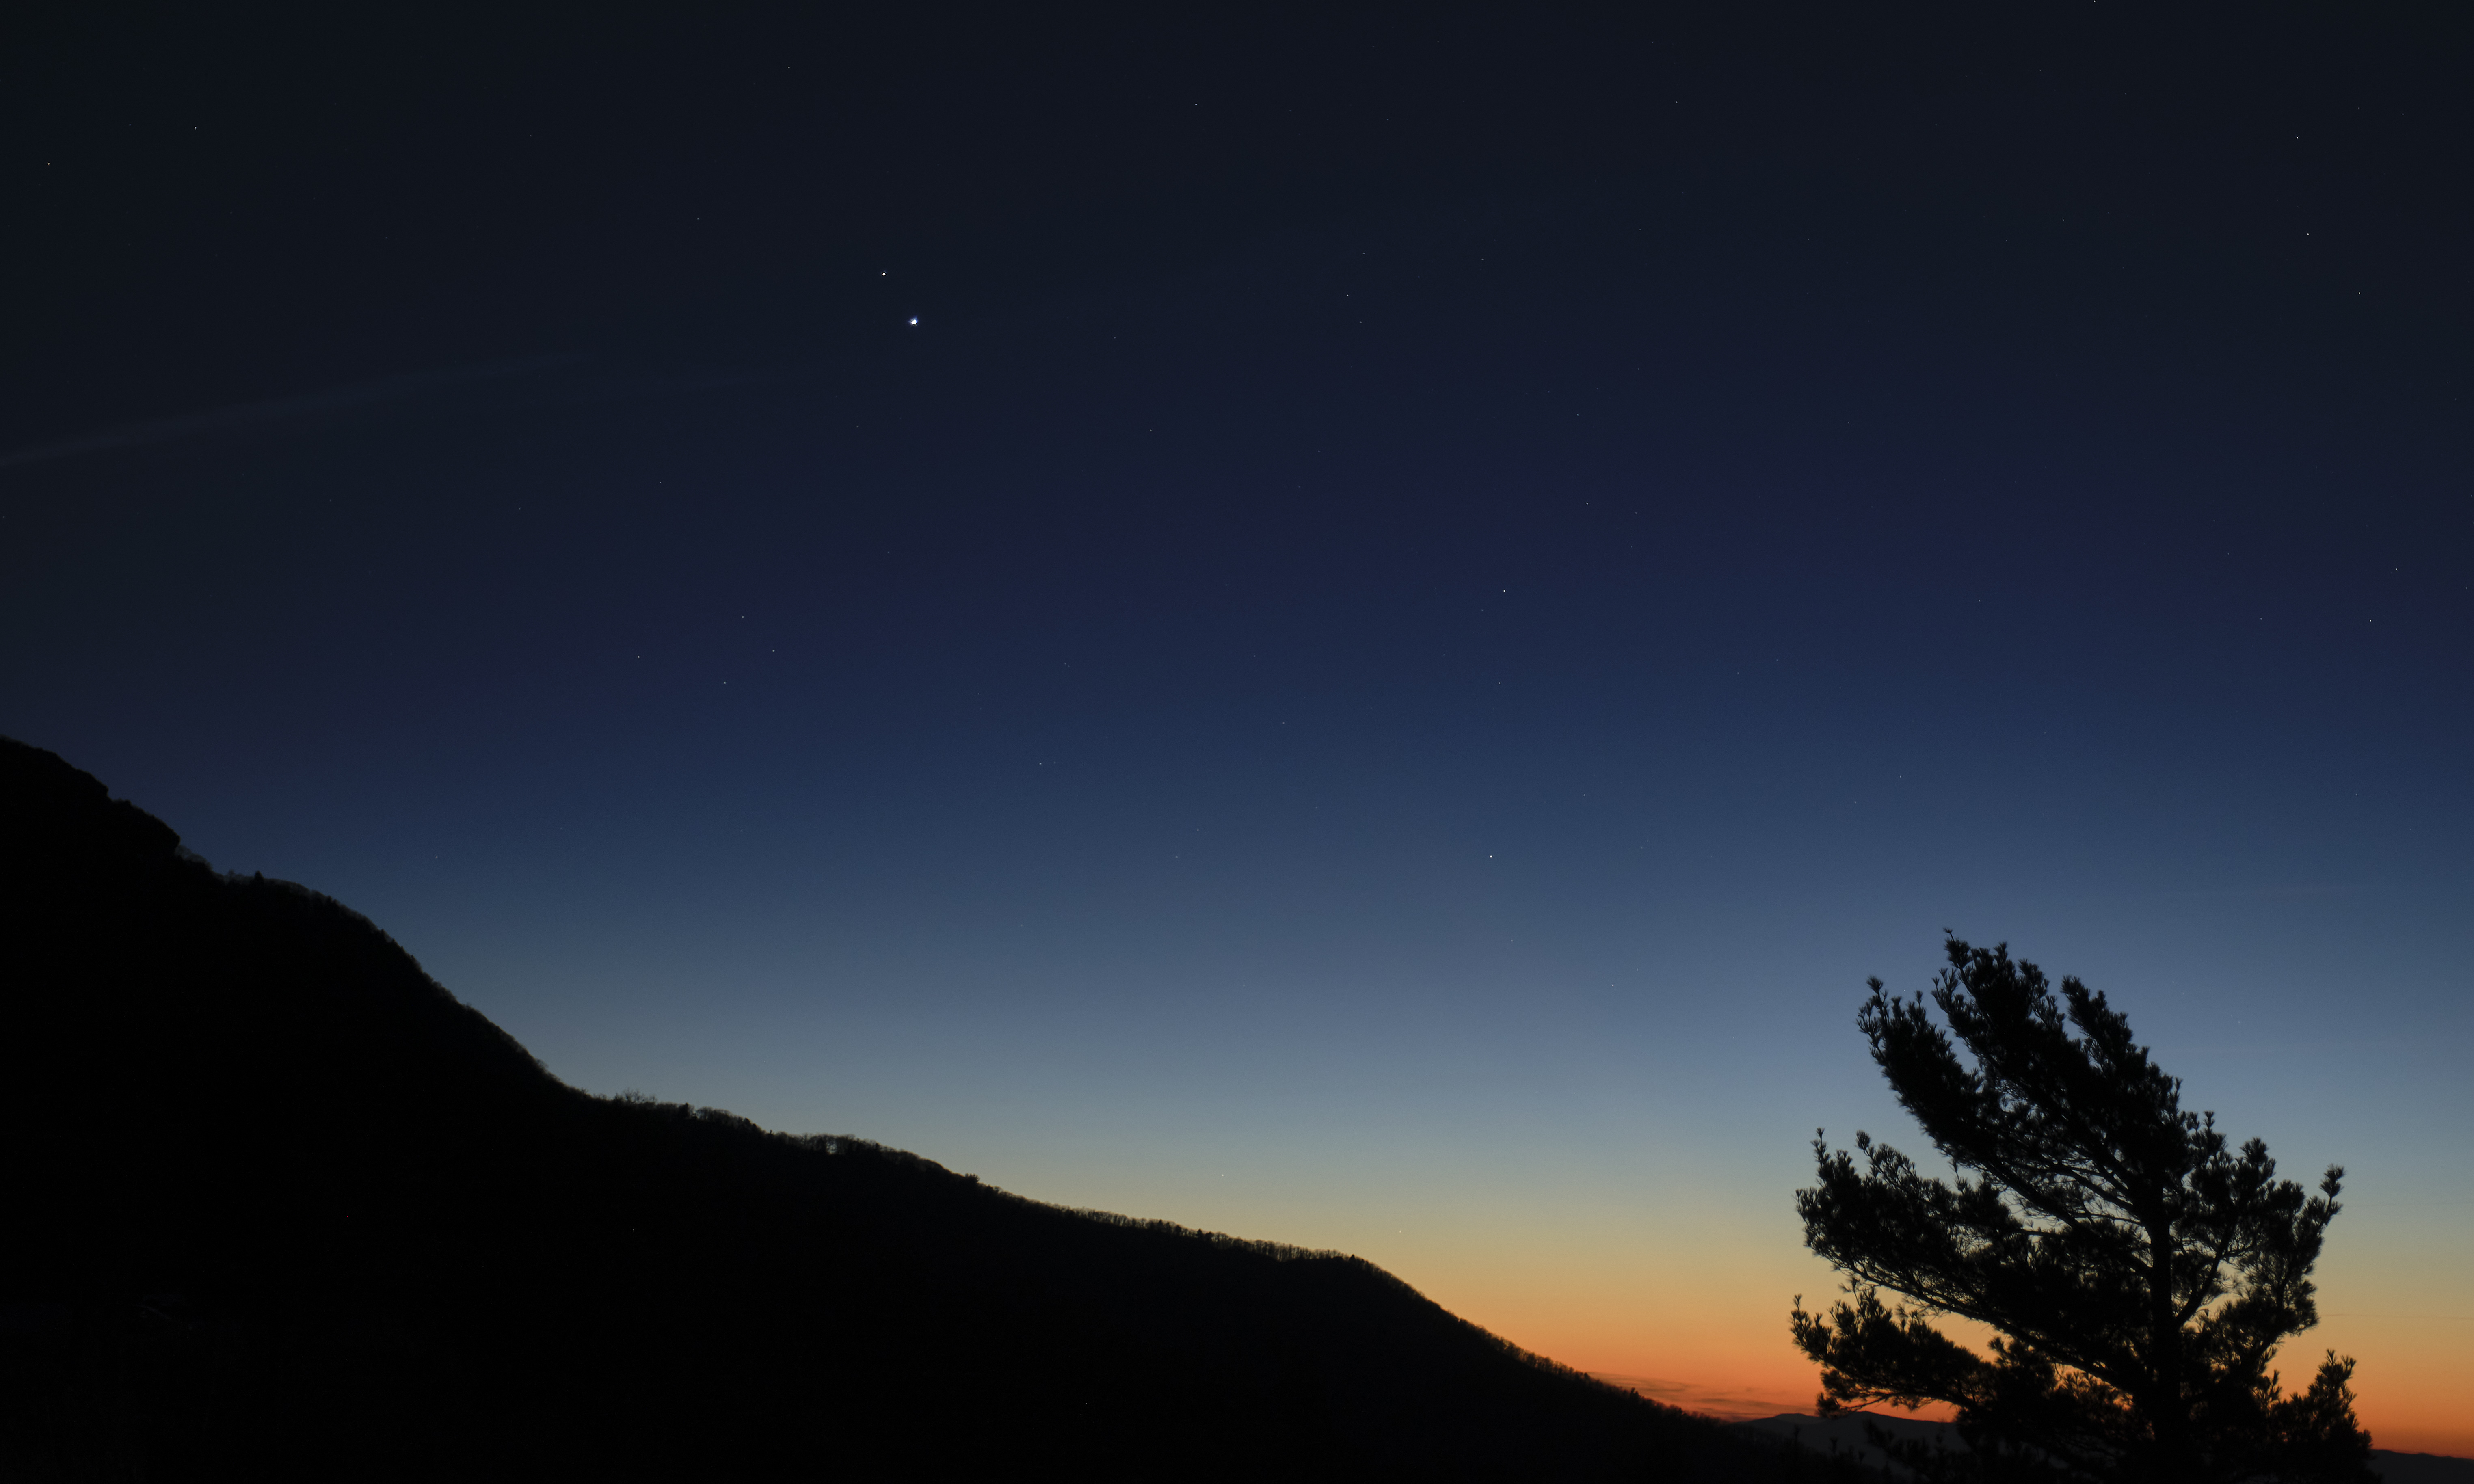 jupiter and saturn visible at dusk just above the horizon of a dark mountain landscape